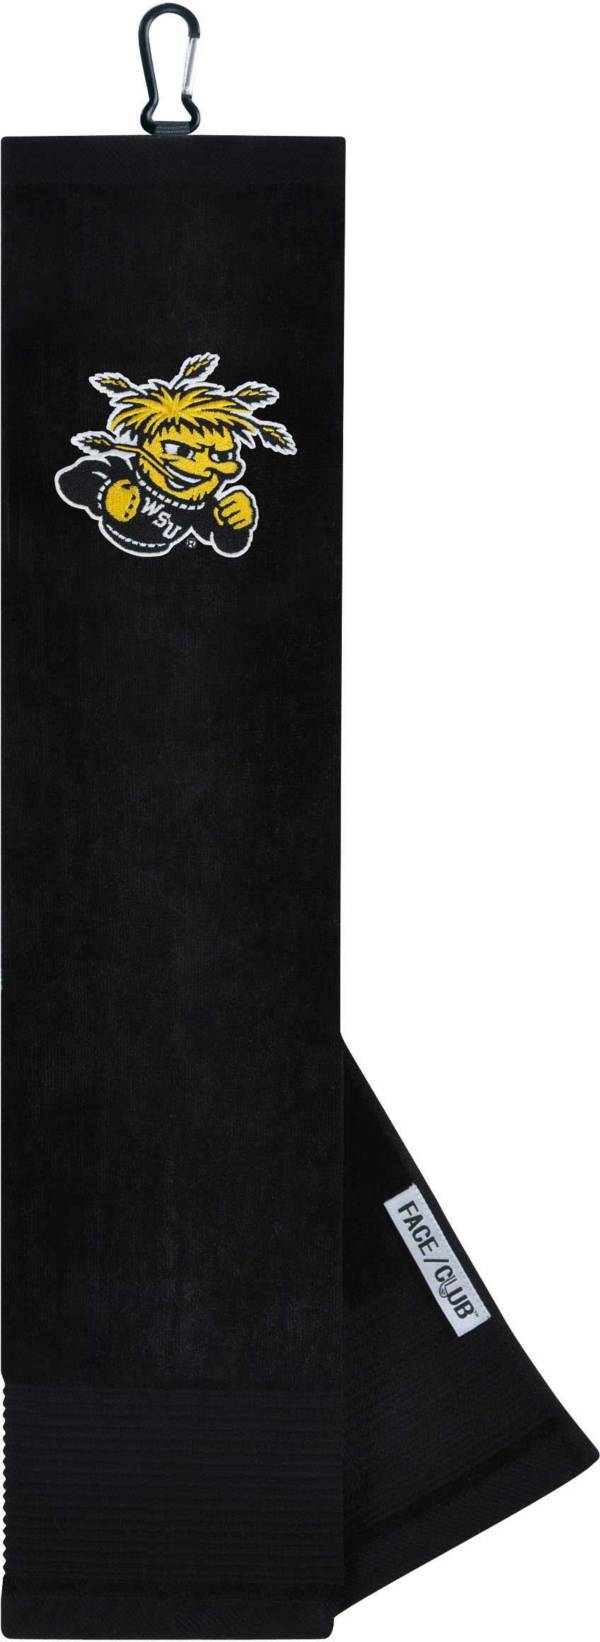 Team Effort Wichita State Shockers Embroidered Face/Club Tri-Fold Towel product image